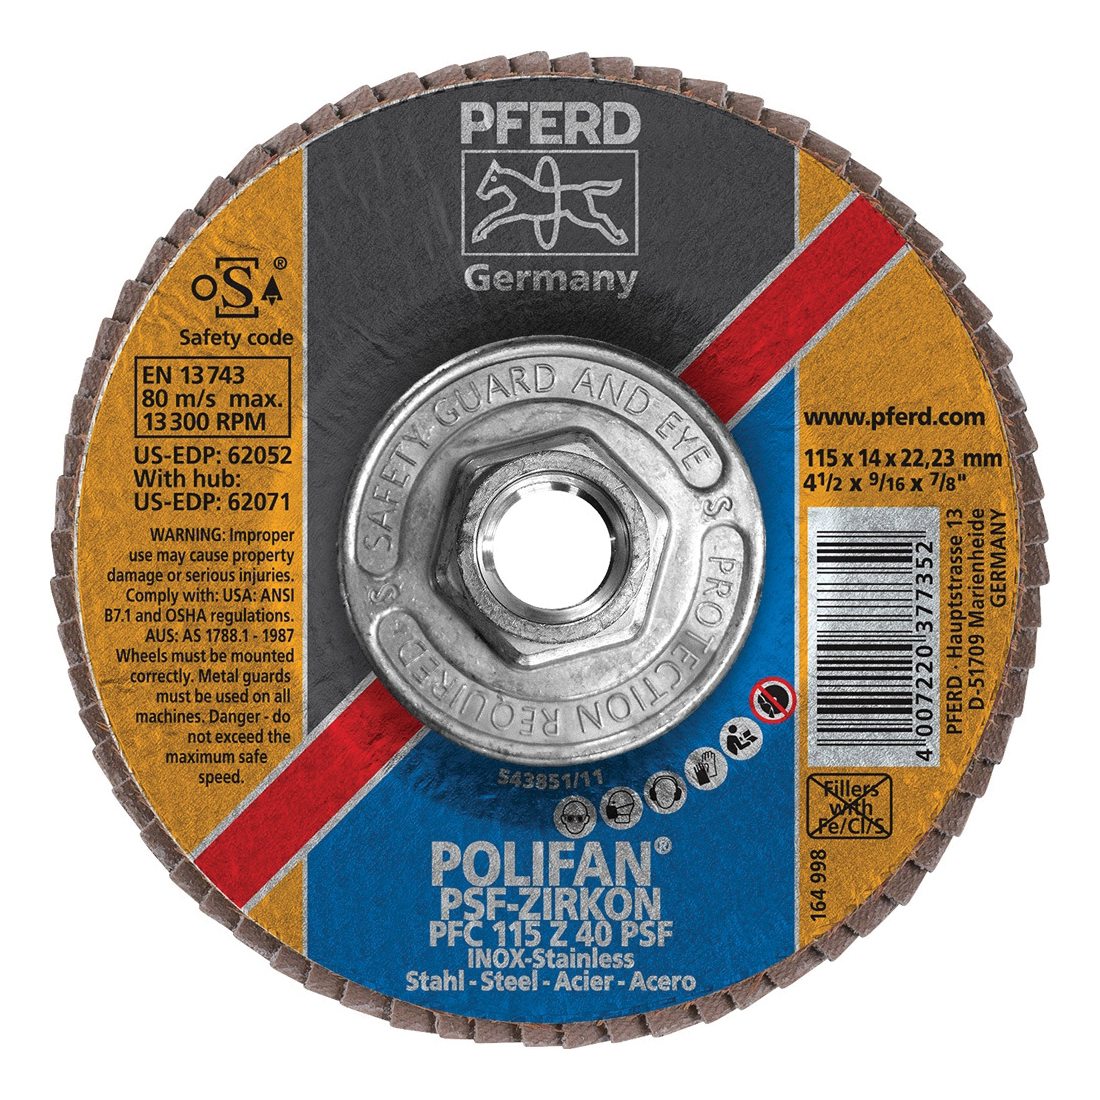 PFERD Polifan® 62071 Universal Line PSF-Z Threaded Coated Abrasive Flap Disc, 4-1/2 in Dia, 40 Grit, Zirconia Alumina Abrasive, Type 29 Conical Disc